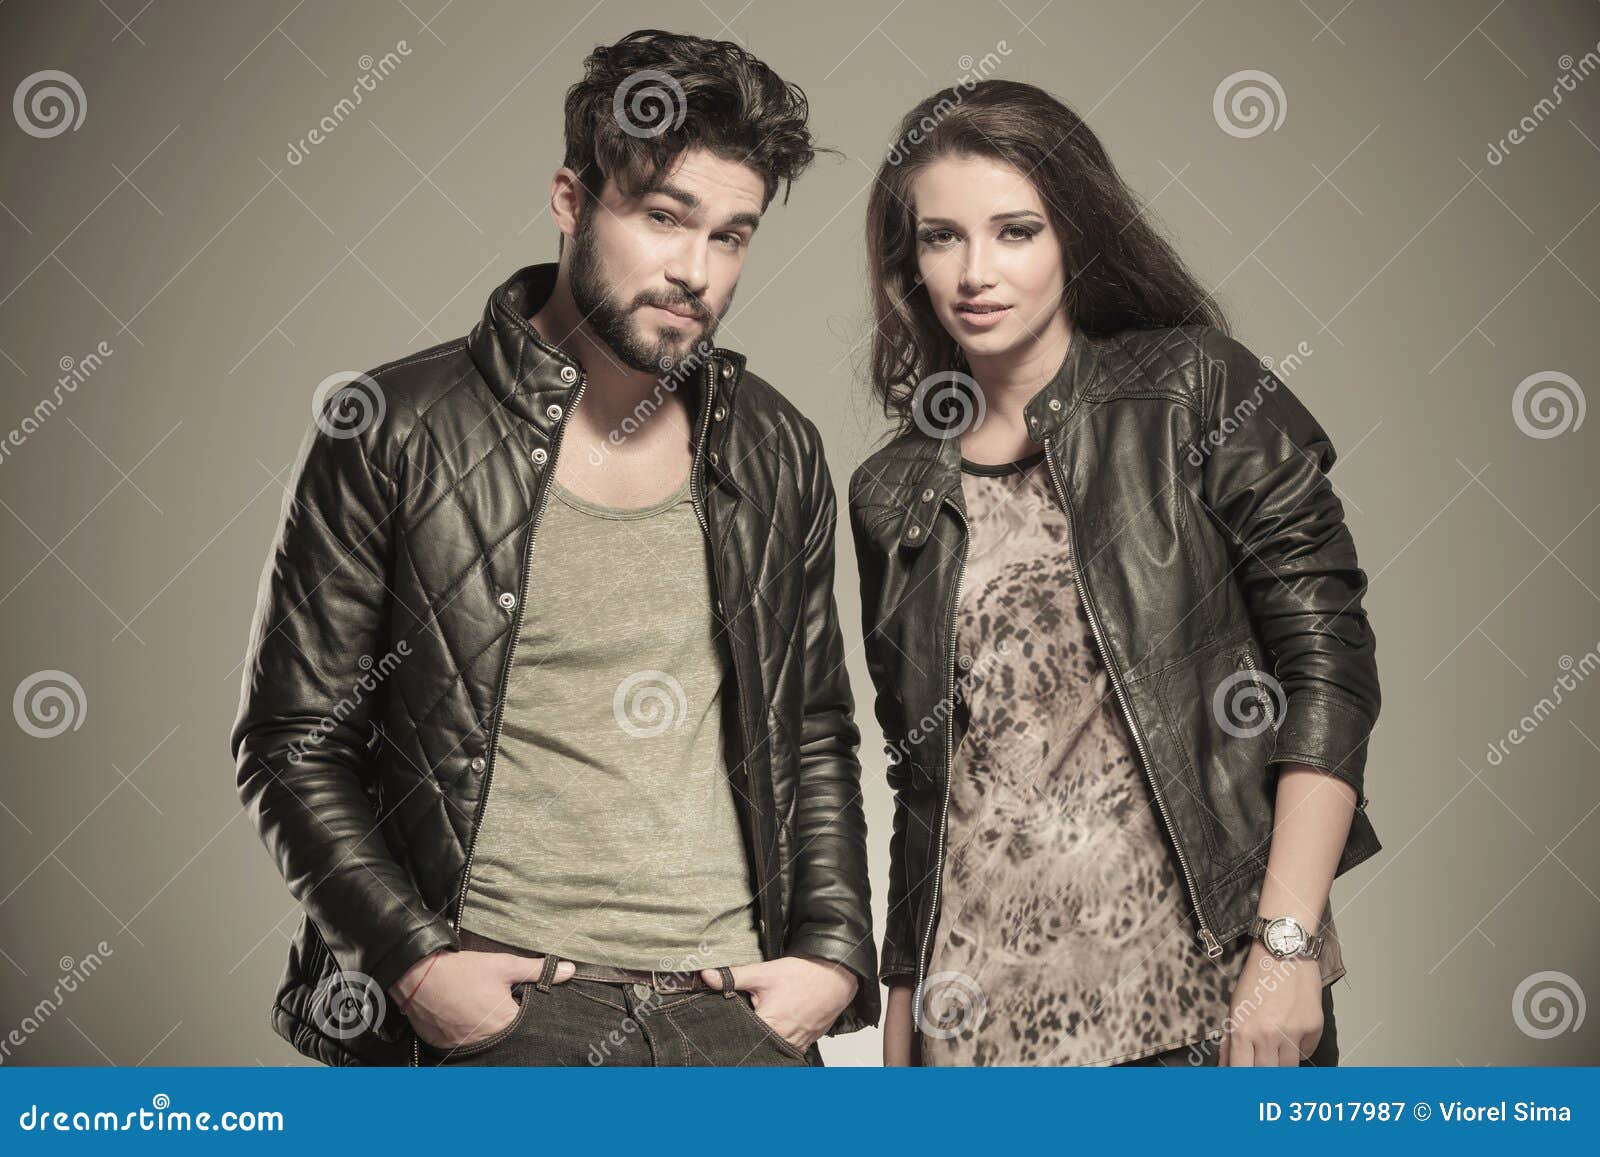 Rock and Roll Couple in Leather Clothes Standing Together Stock Image -  Image of length, male: 68245143